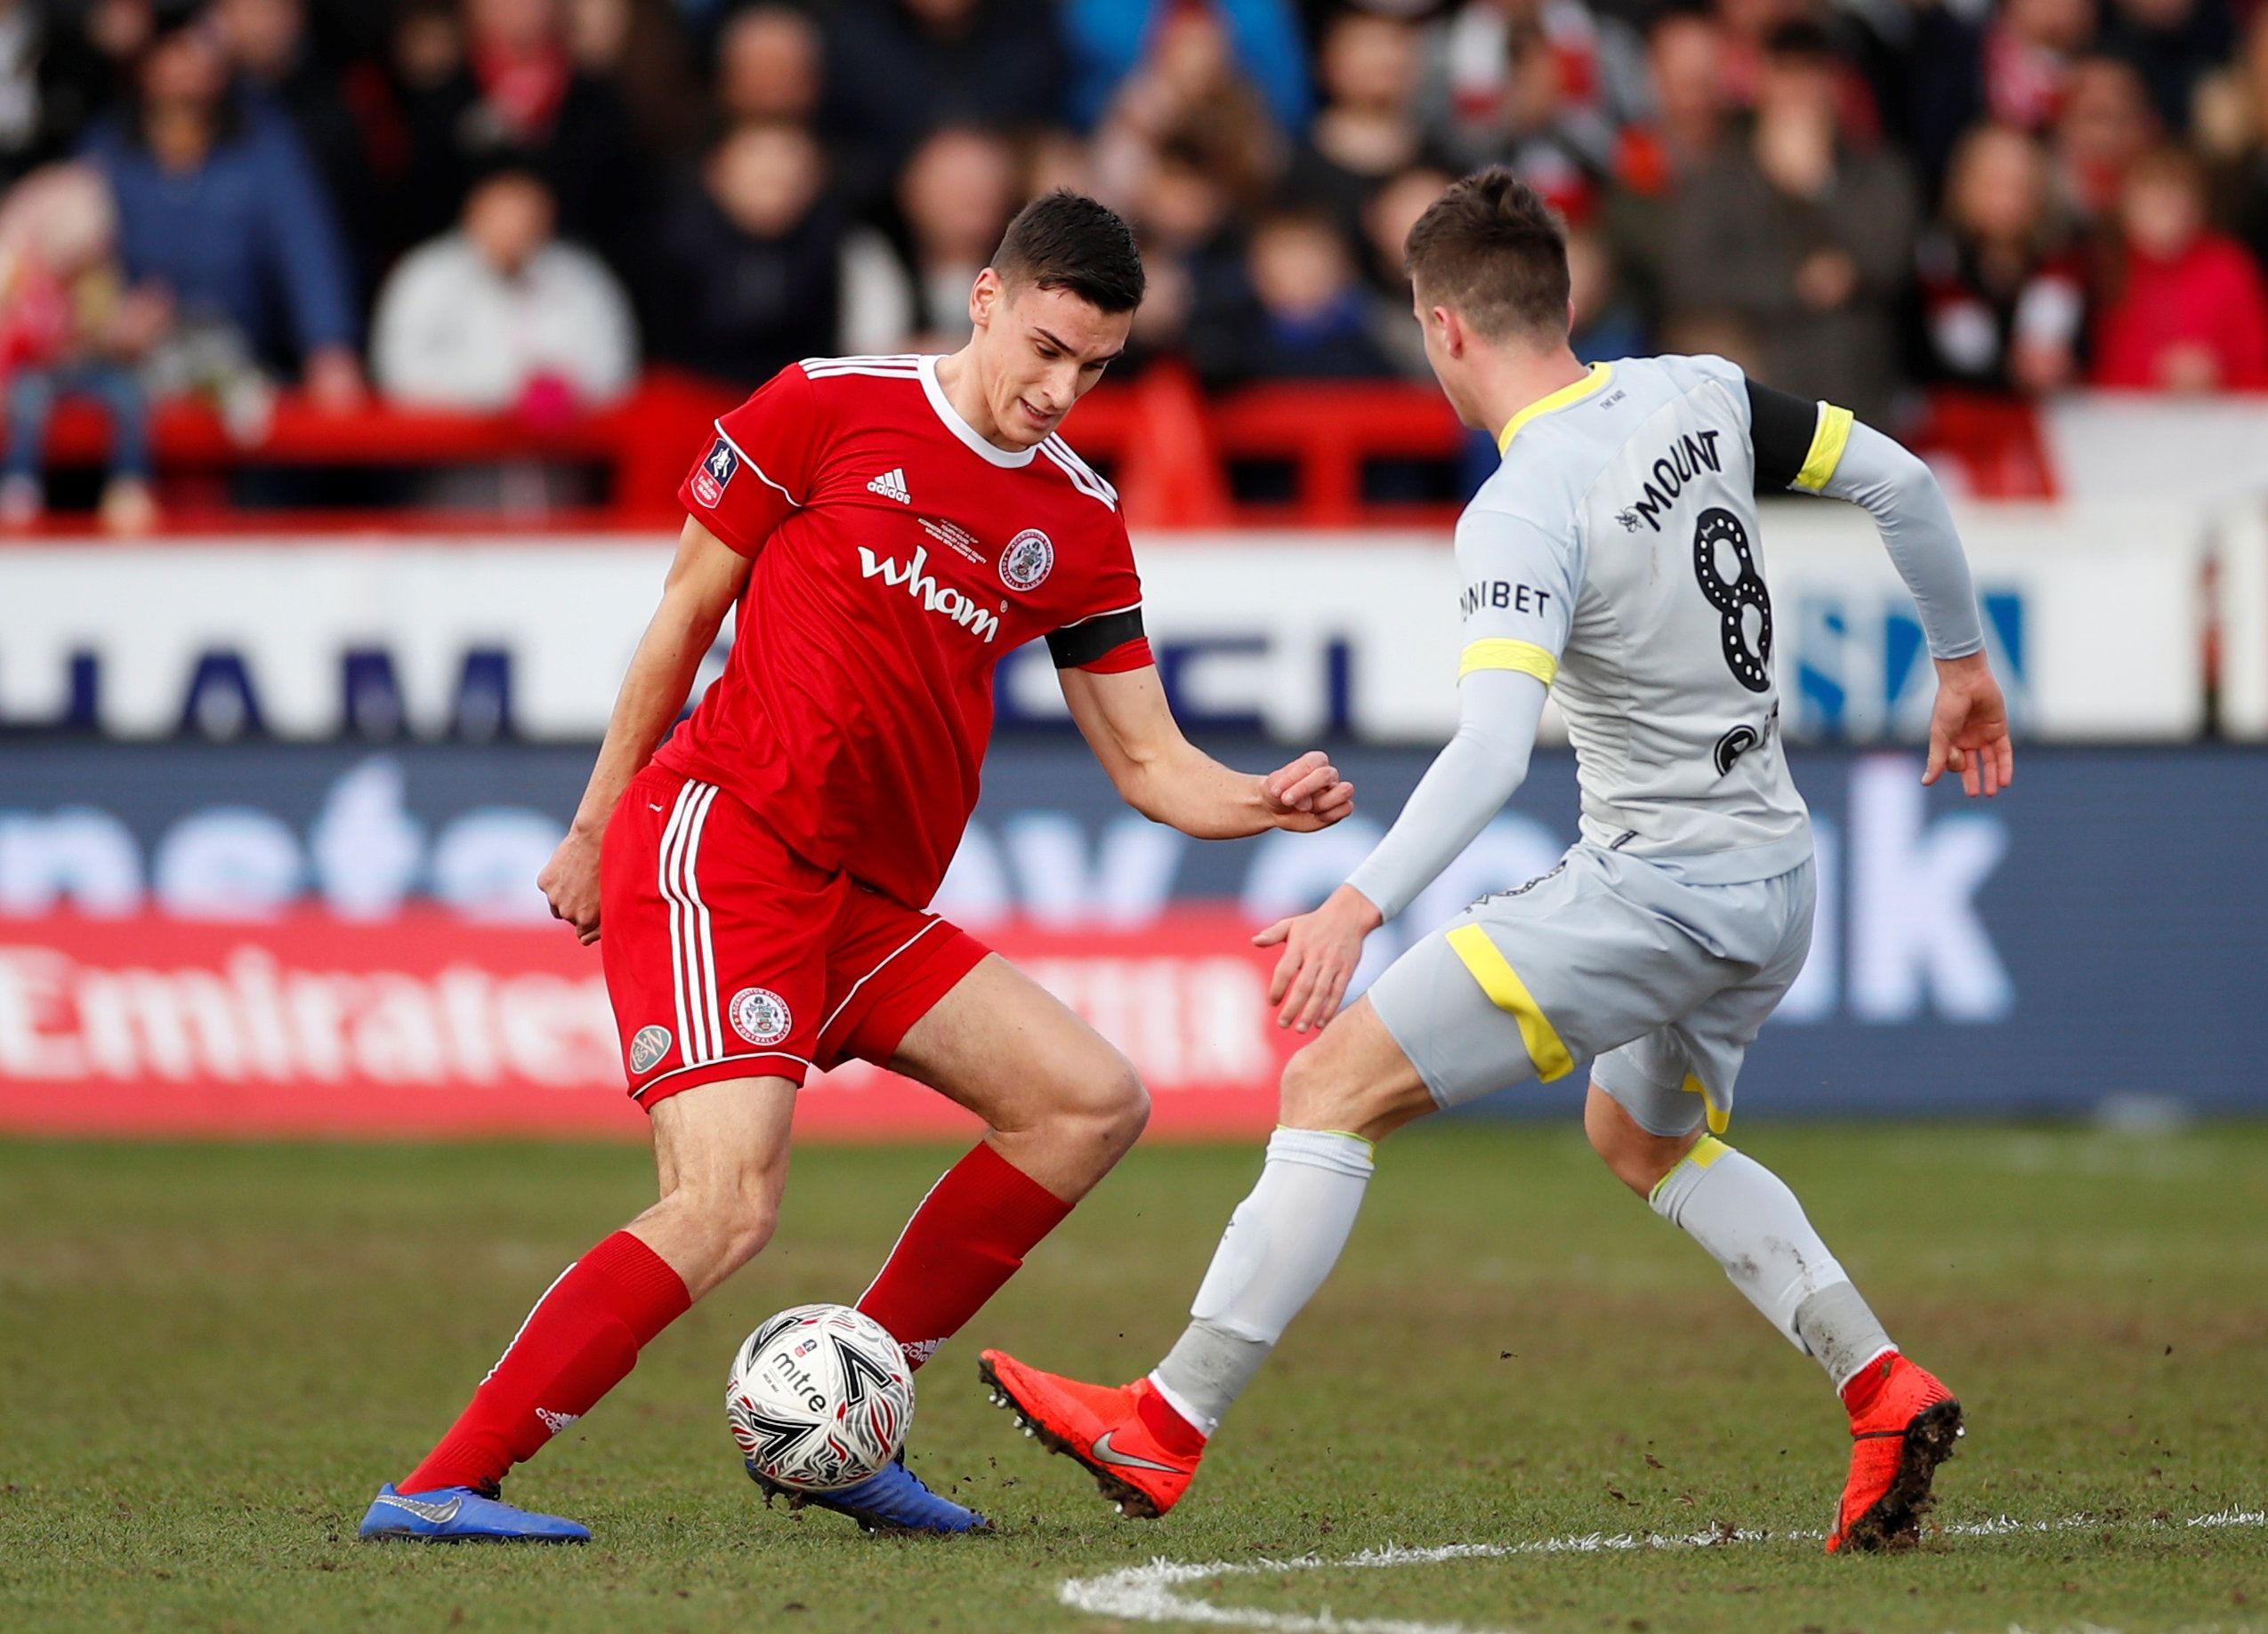 Soccer Football - FA Cup Fourth Round - Accrington Stanley v Derby County - Wham Stadium, Accrington, Britain - January 26, 2019   Accrington Stanley's Ross Sykes in action with Derby County's Mason Mount        Action Images/Andrew Boyers